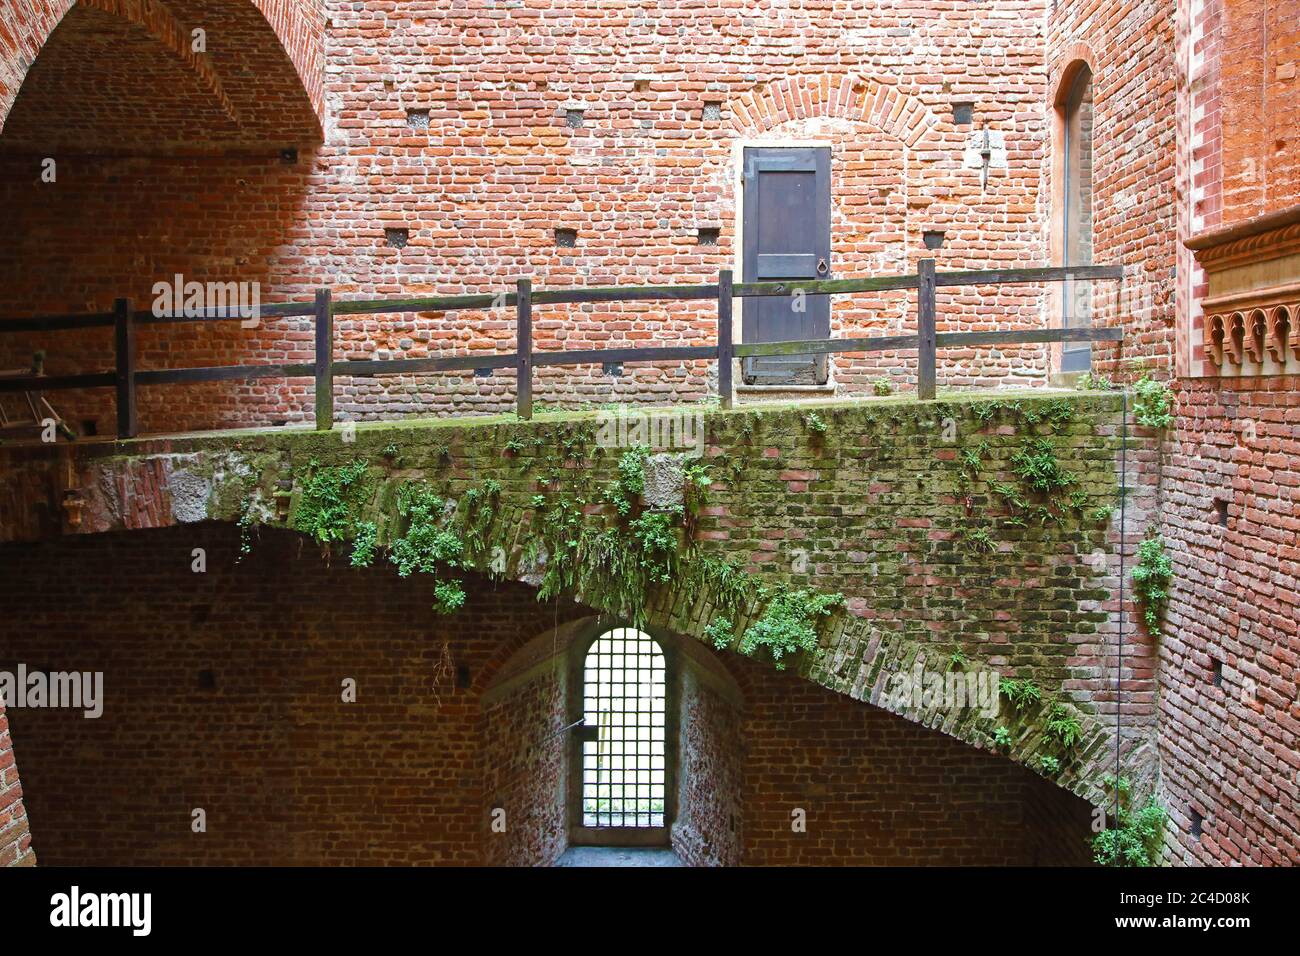 Internal detail from Sforza castle in Milan, Italy Stock Photo